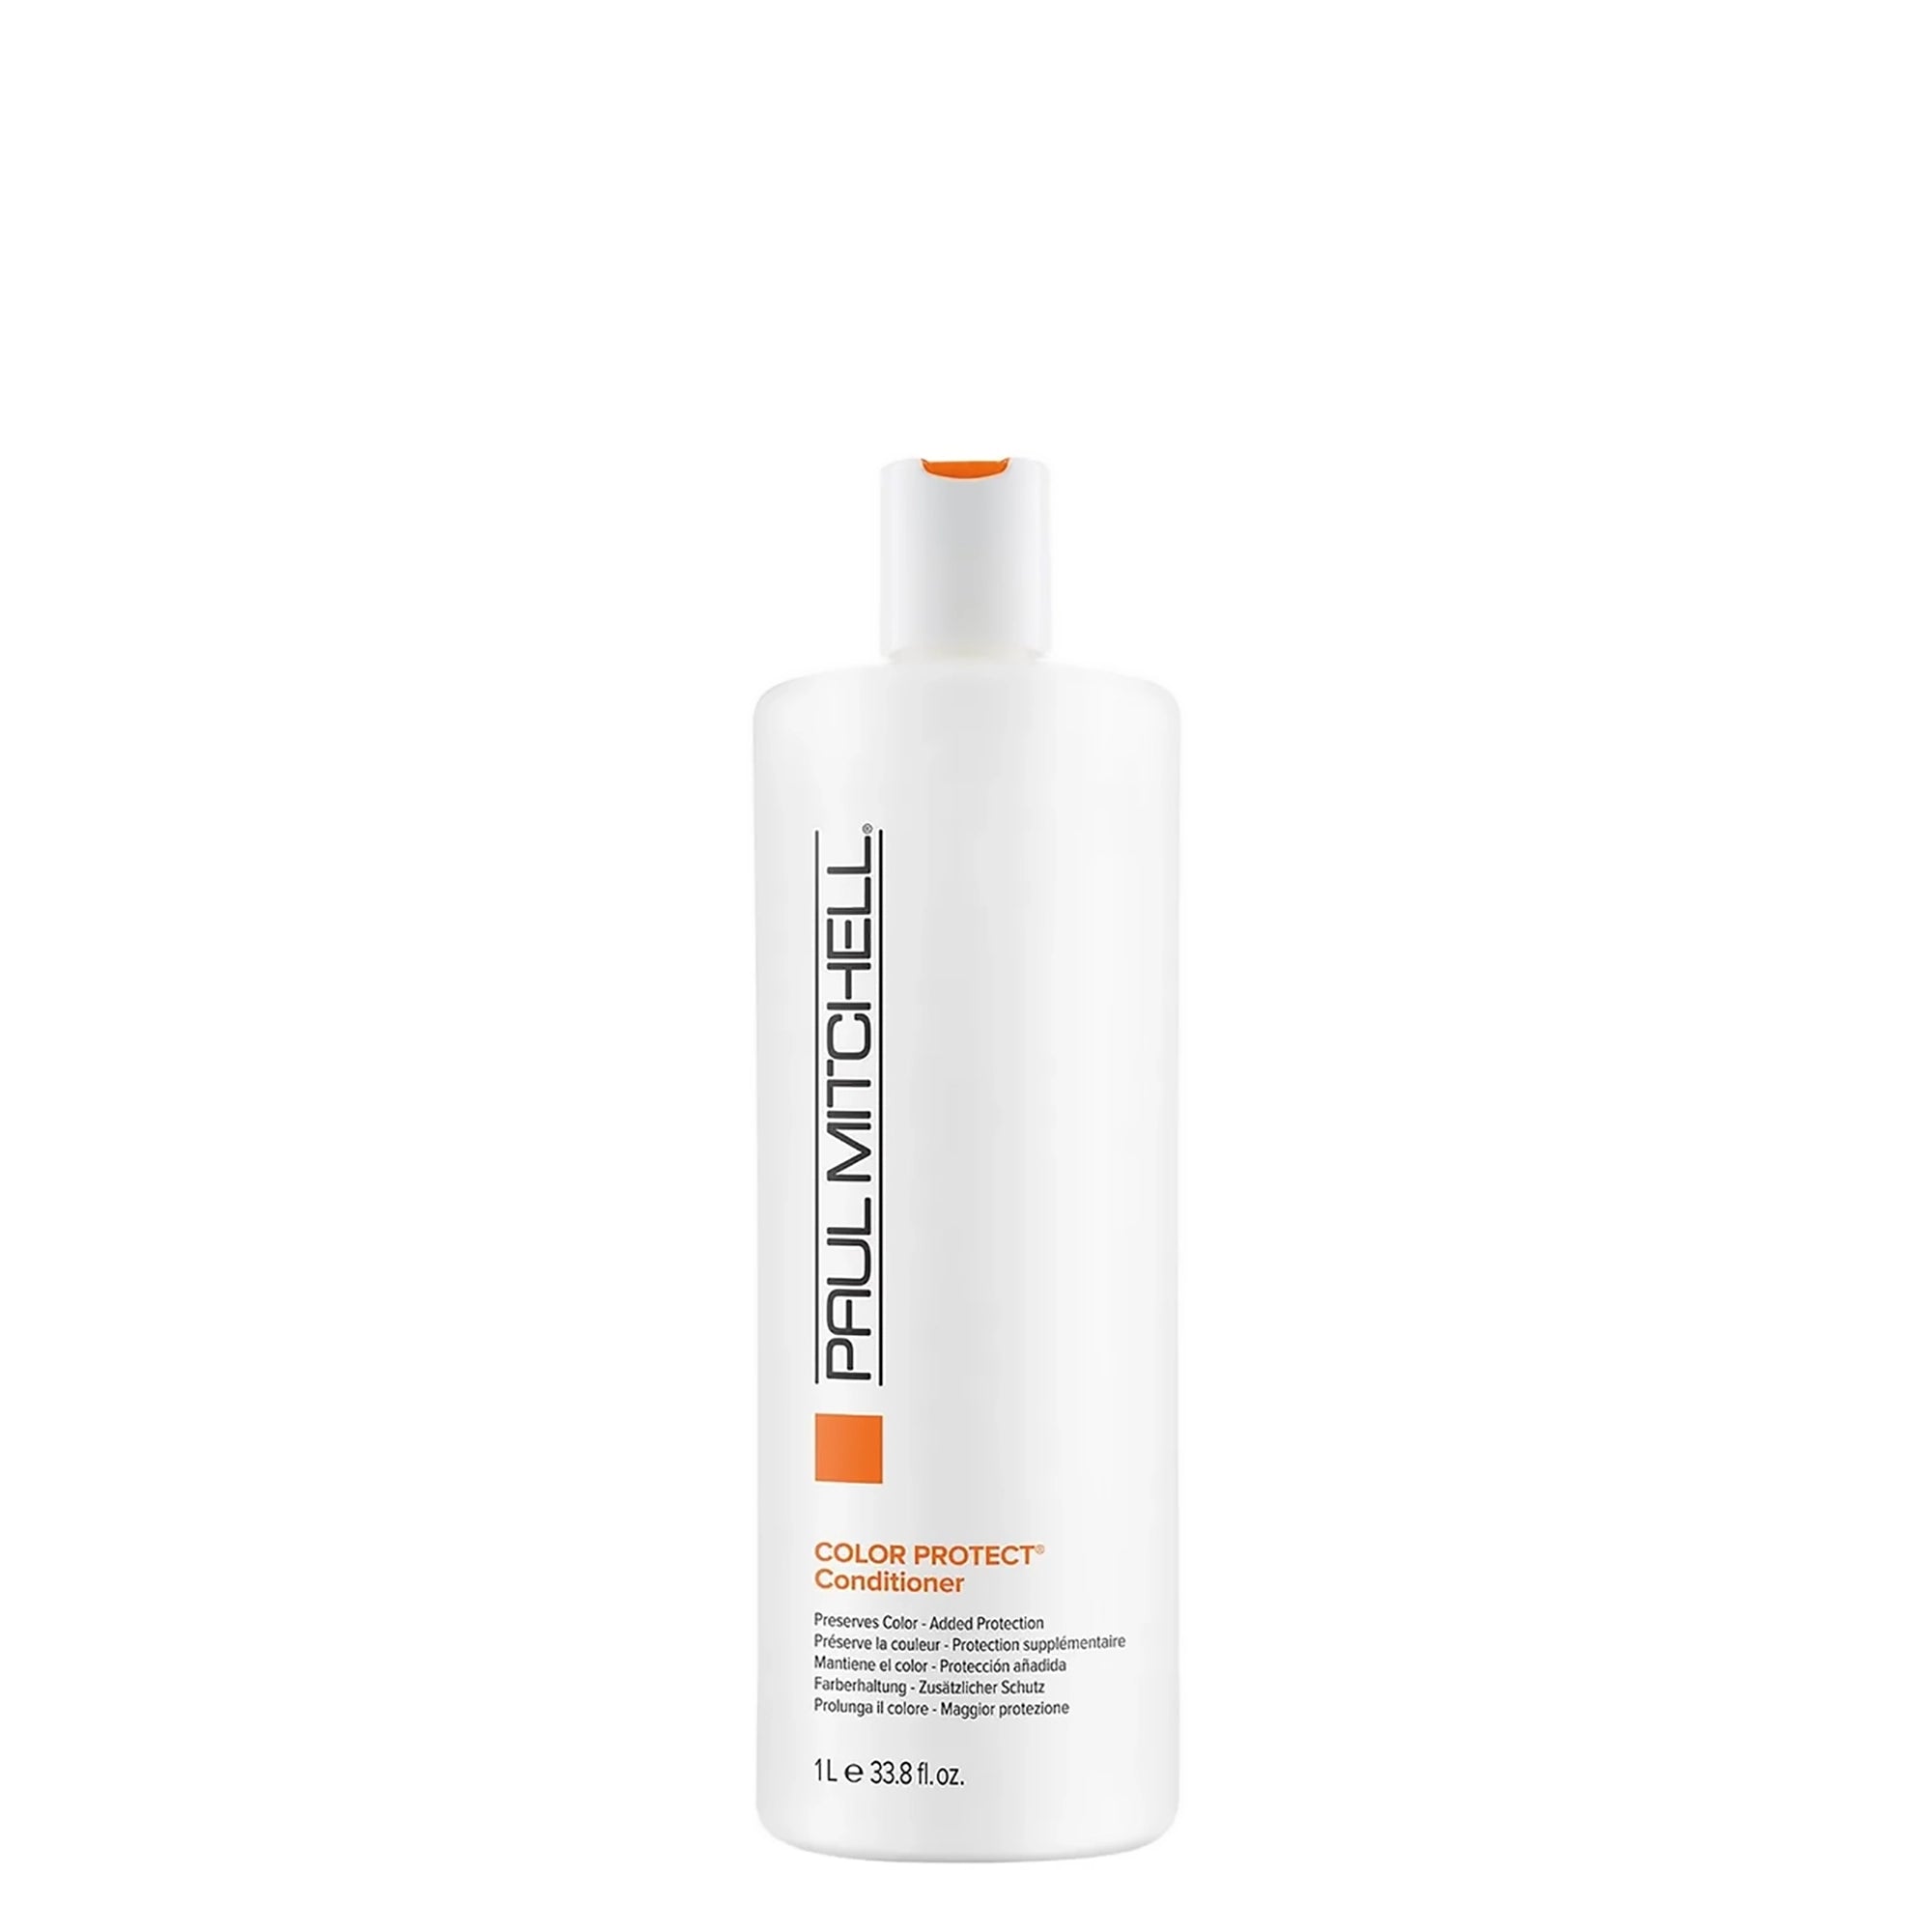 Paul Mitchell Color Protect Shampoo and Conditioner Duo Liter ($59 Value) / LITER